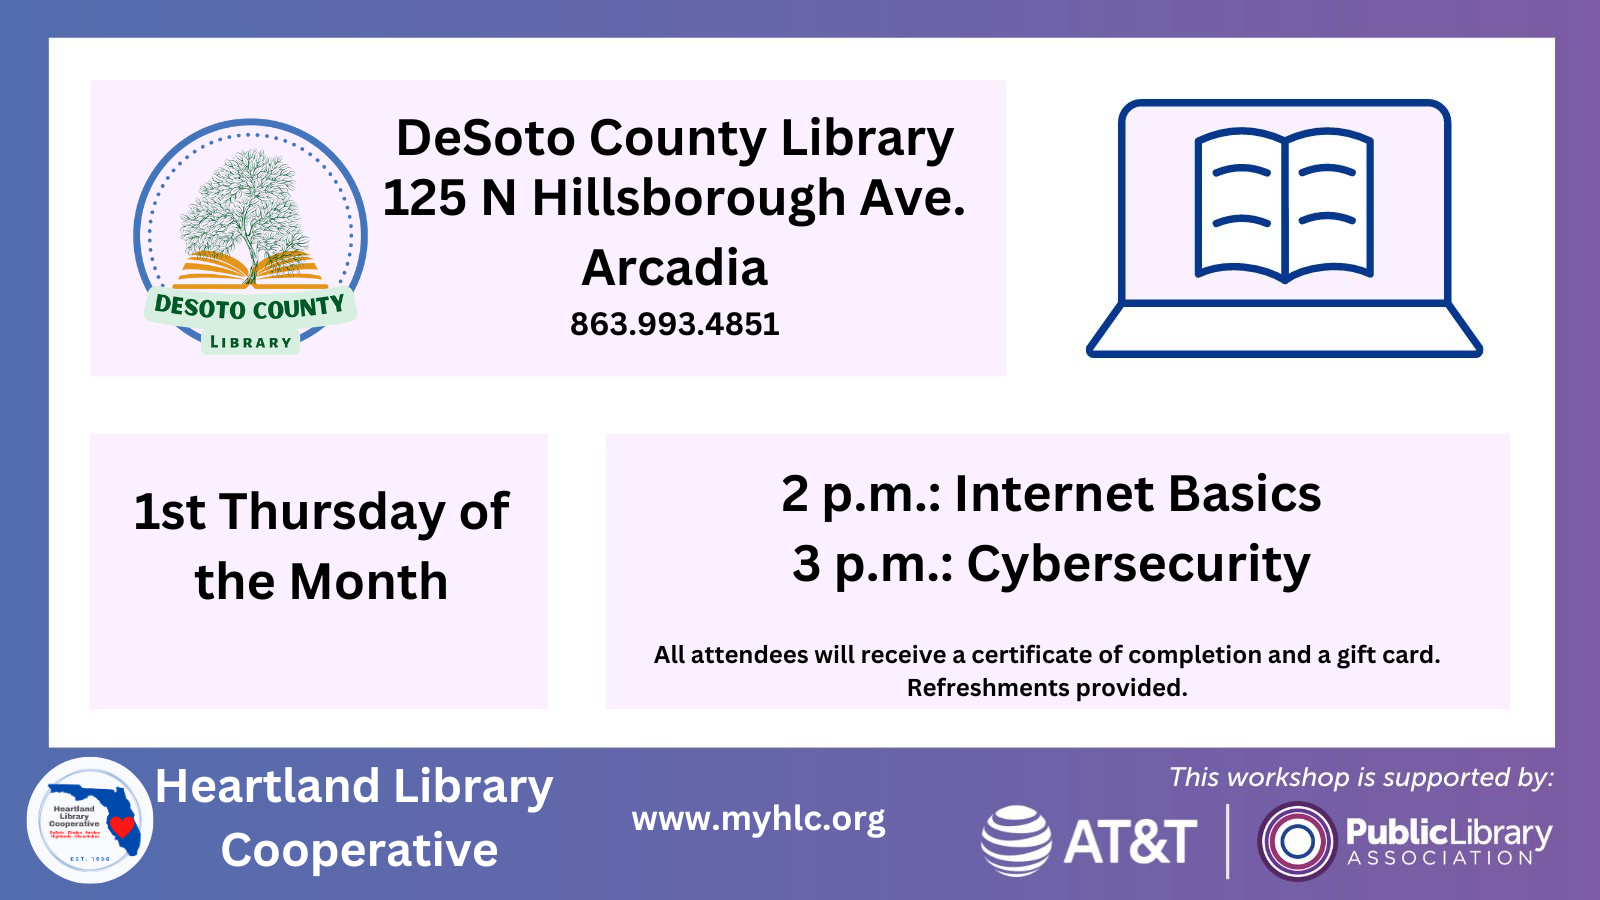 On the first Thursday of each month, DeSoto County Library will be hosting an internet basics course at 2 p.m. and a cybersecurity course at 3 p.m.